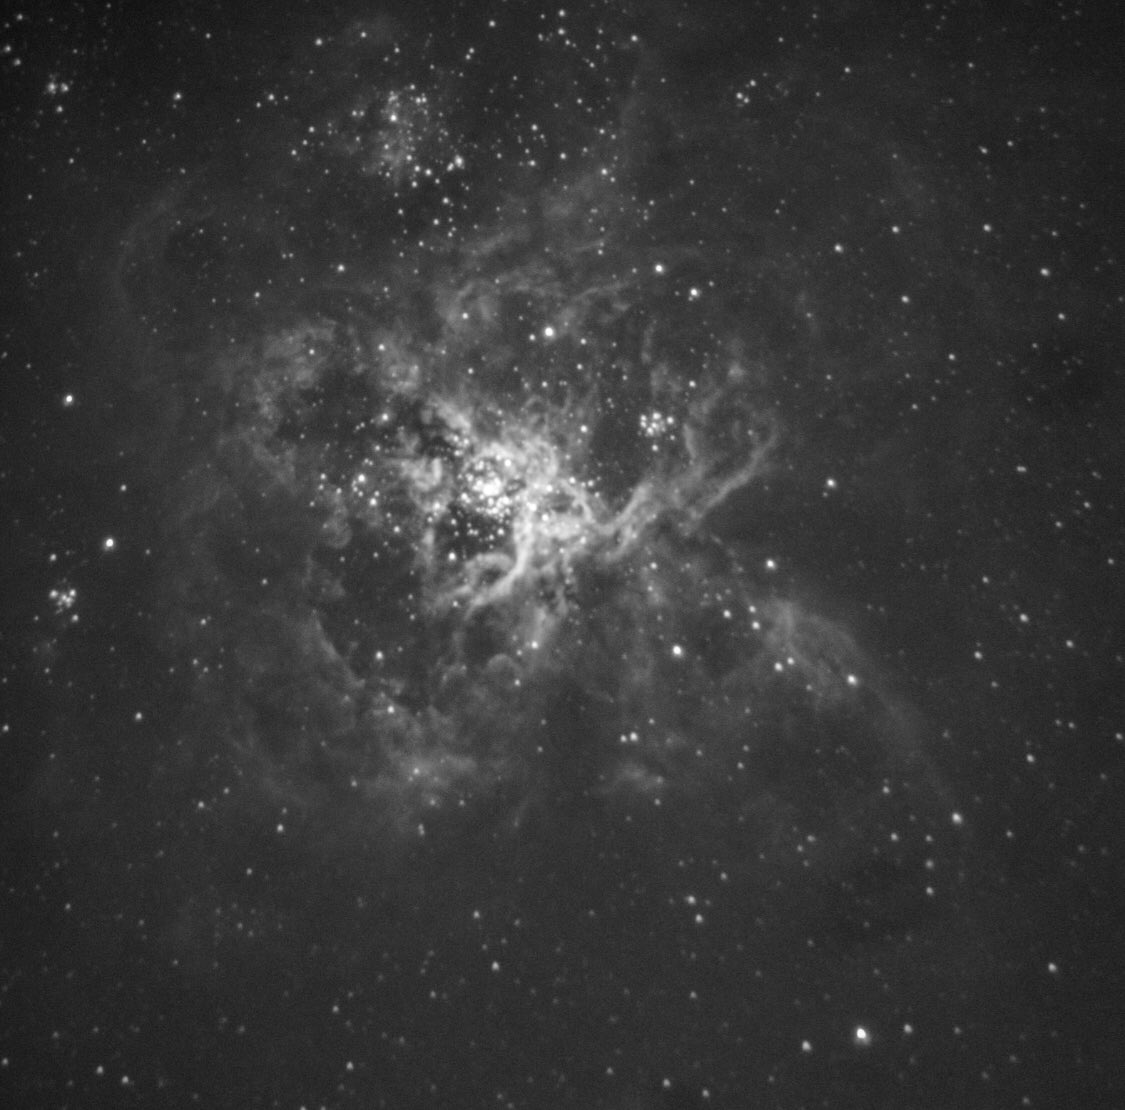 Stepping out into our friendly Neighbour hood galaxy (that our galaxy is chomping on), the Large Magellanic Cloud .... it’s the Tarantula Nebula! Big, very bright and 160,000 light years away! If this were in our galaxy, it would be EXTREMELY bright! 8/n